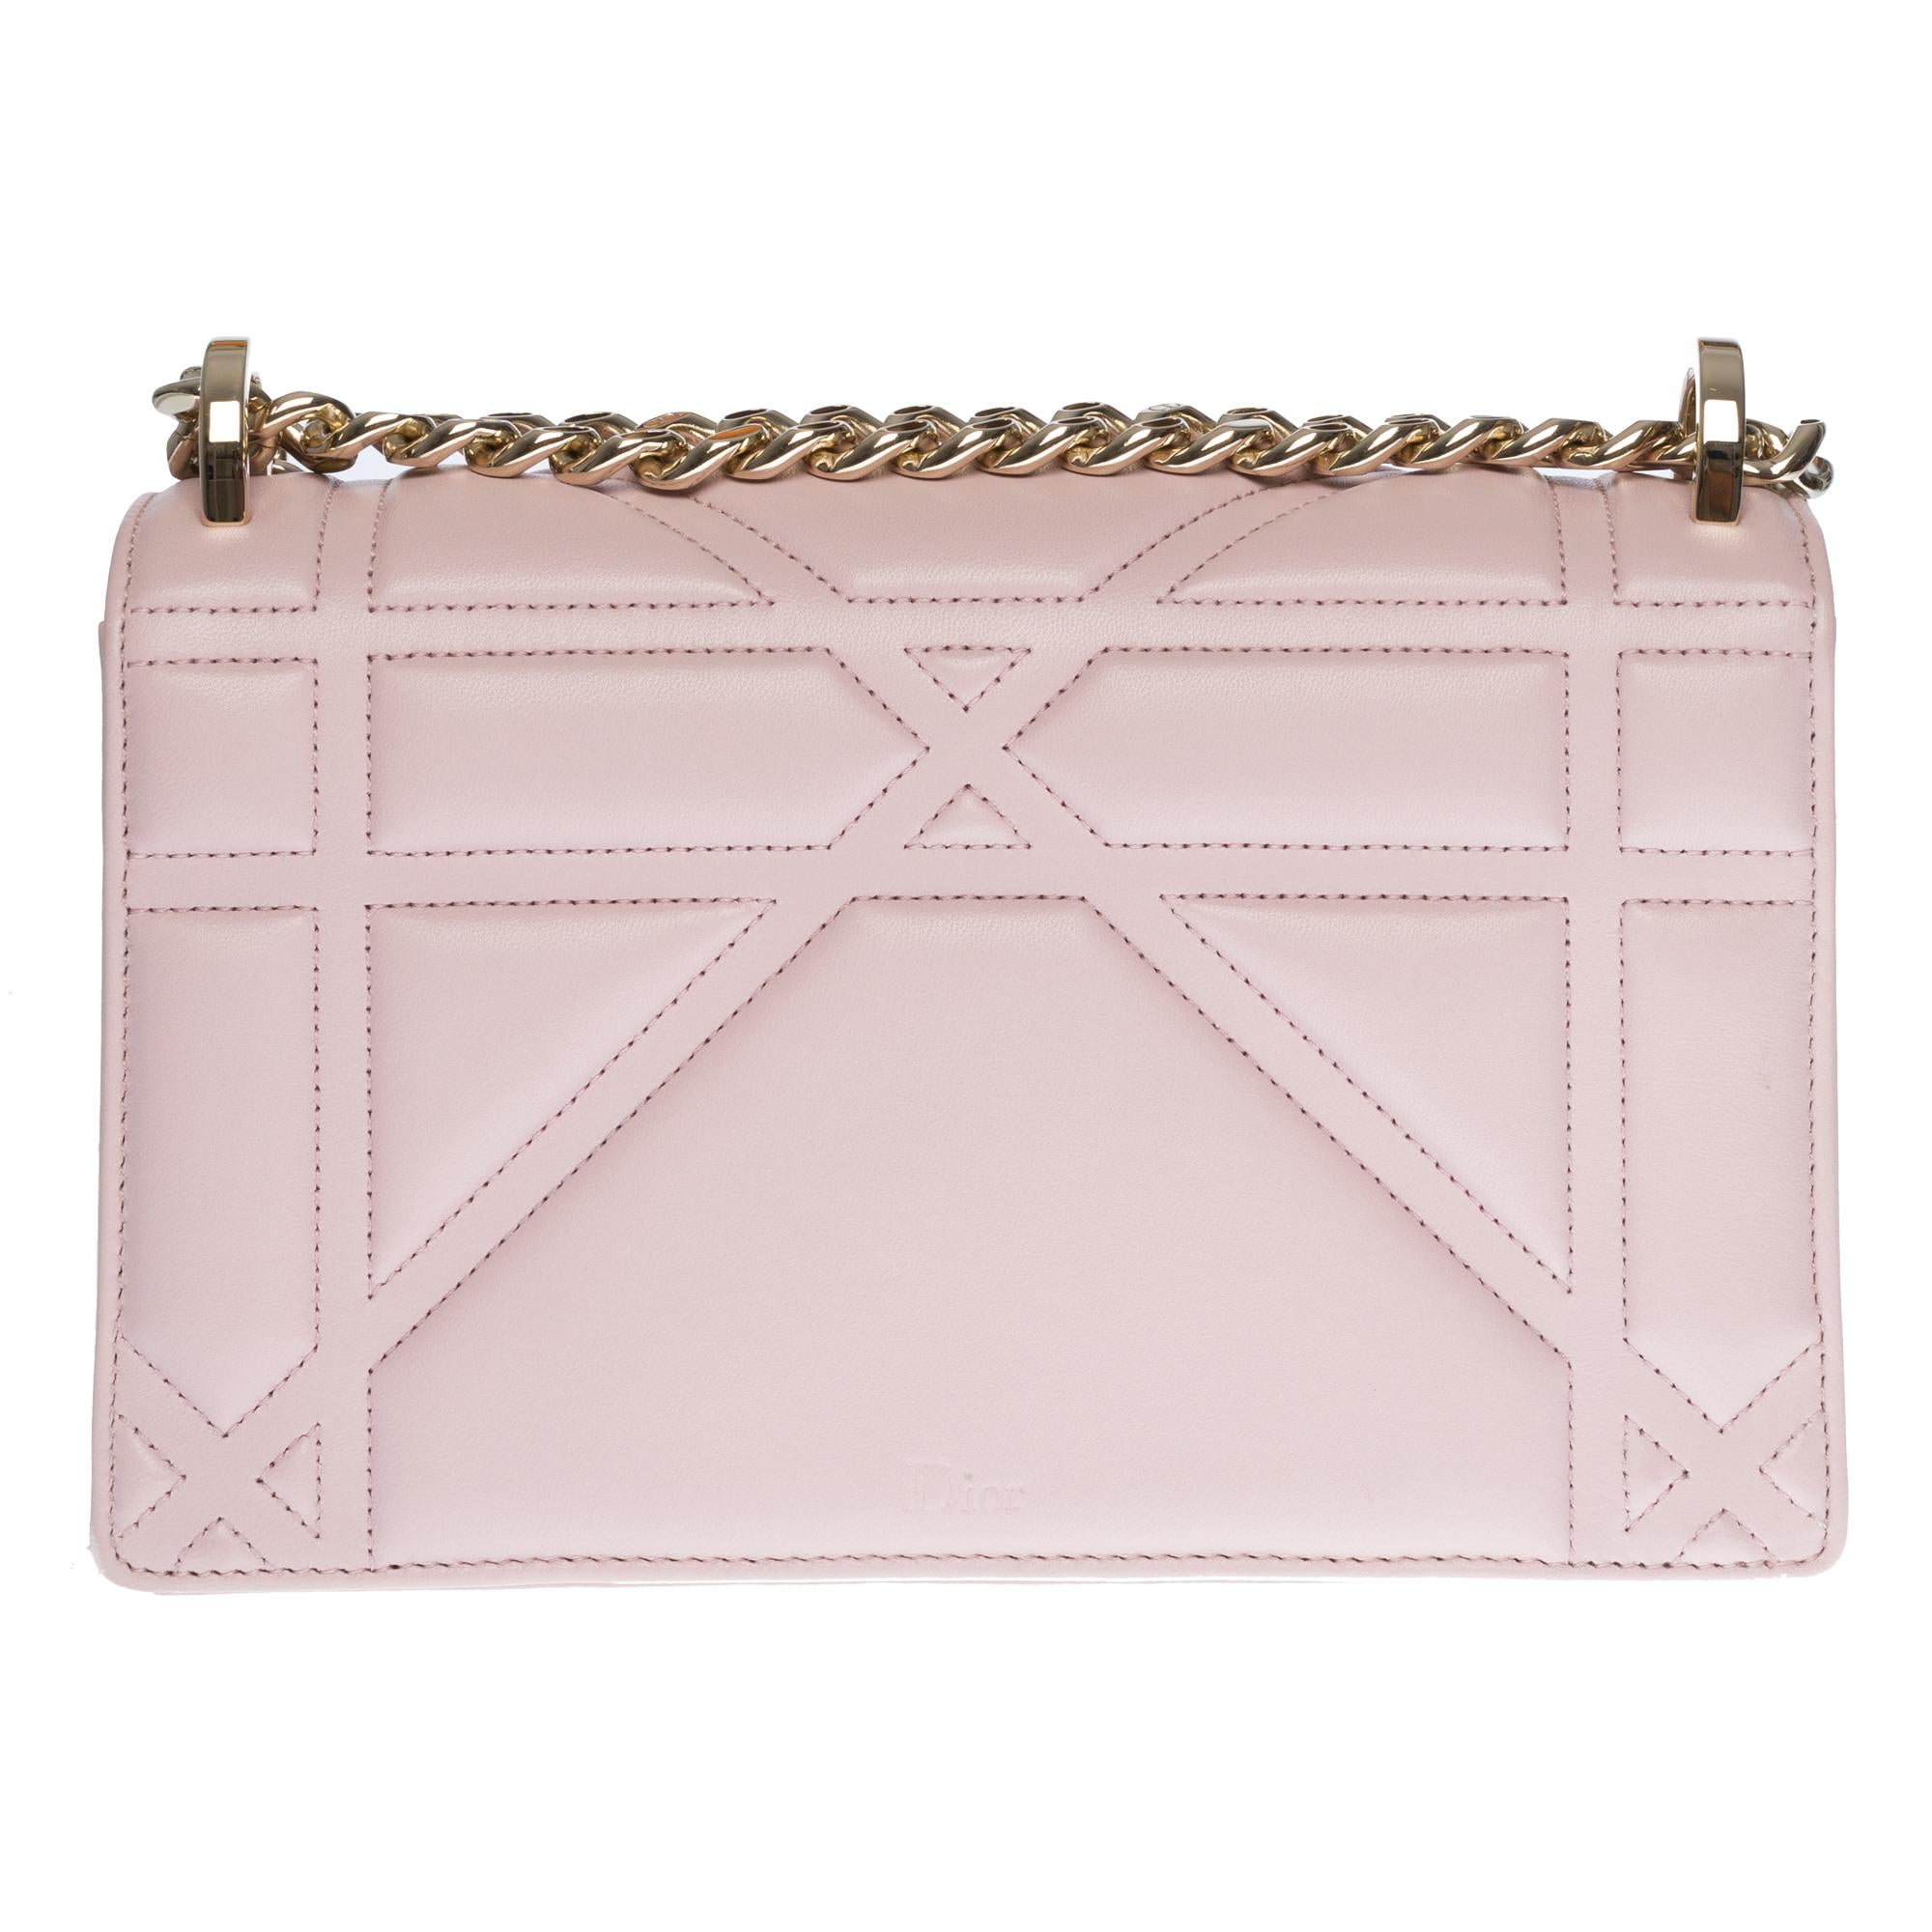 Elegant shoulder bag Christian Dior Diorama in pink lavender lambskin leather, silver metal hardware, a chain handle transformable into silver metal allowing a hand or shoulder or shoulder strap.

Closure by flap and snap button.
Lining in pink